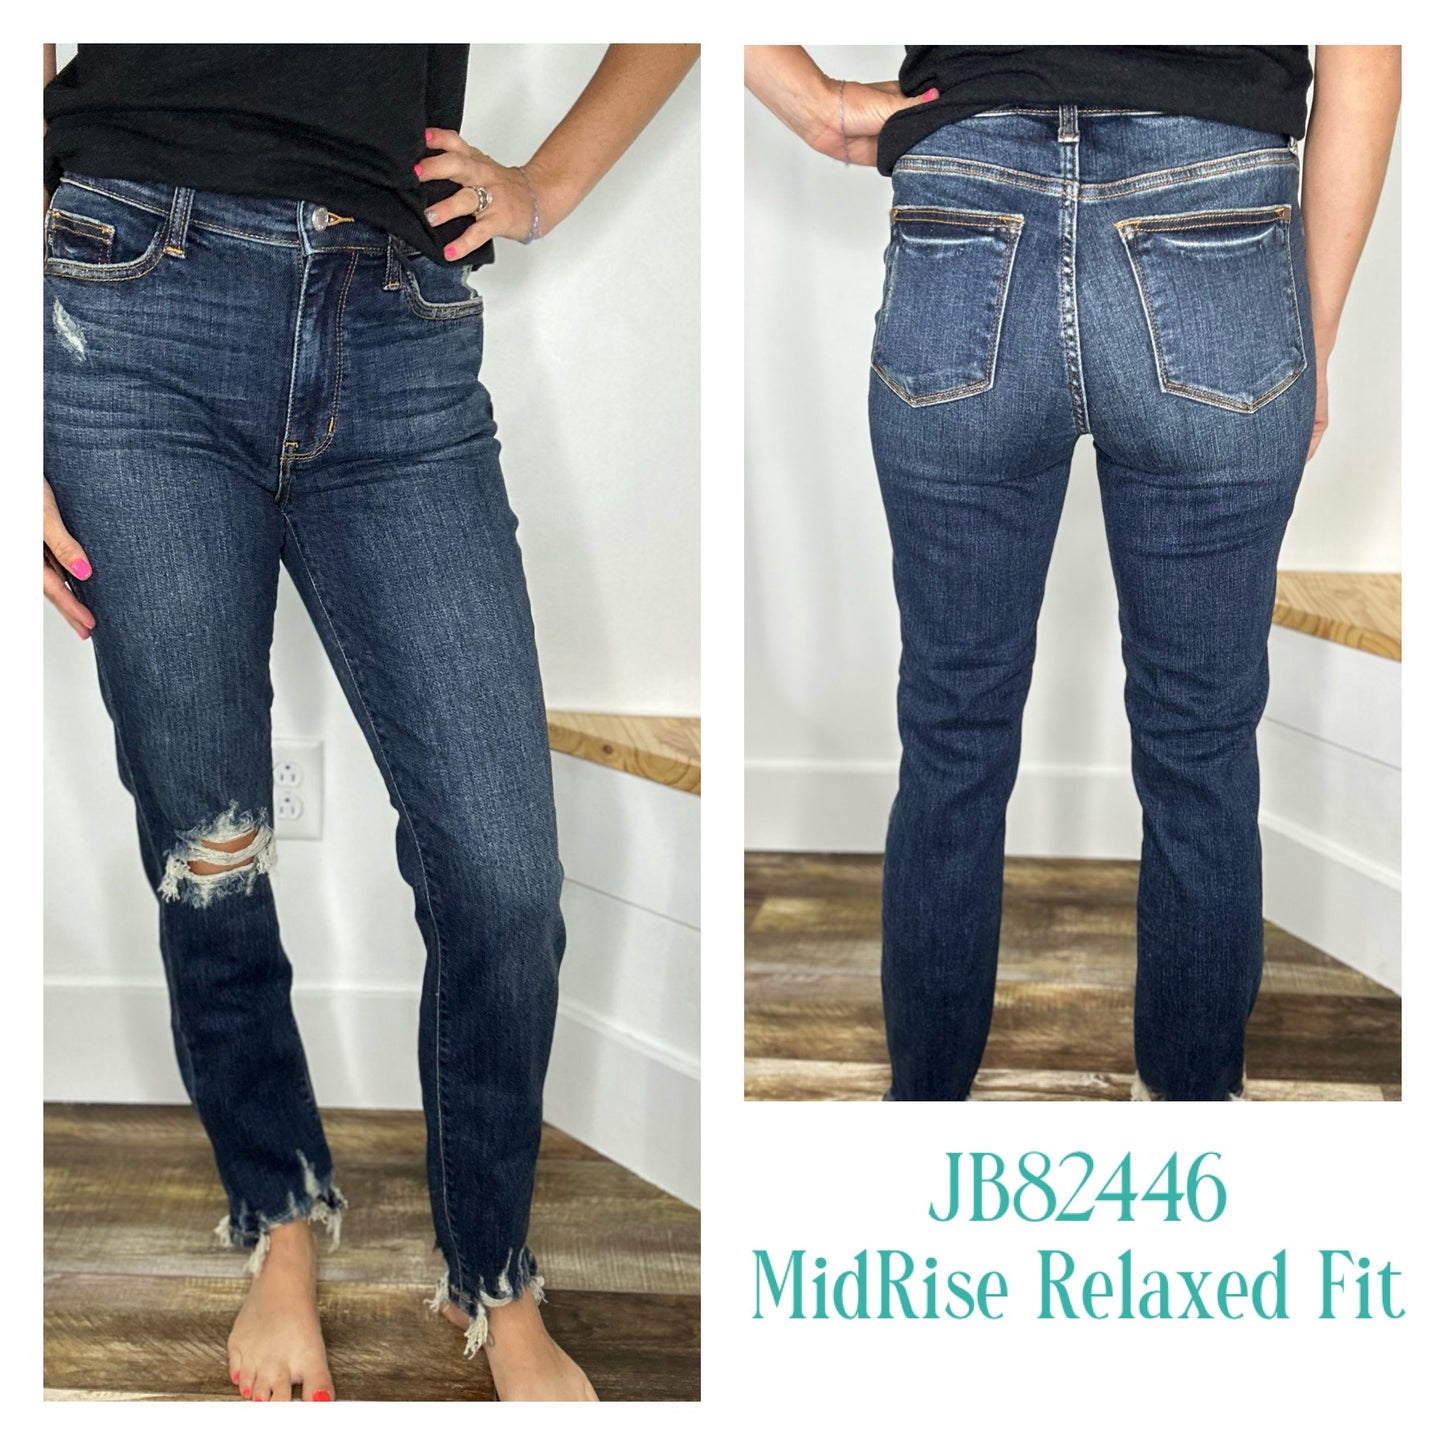 JB82446-MIDRISE RELAXED